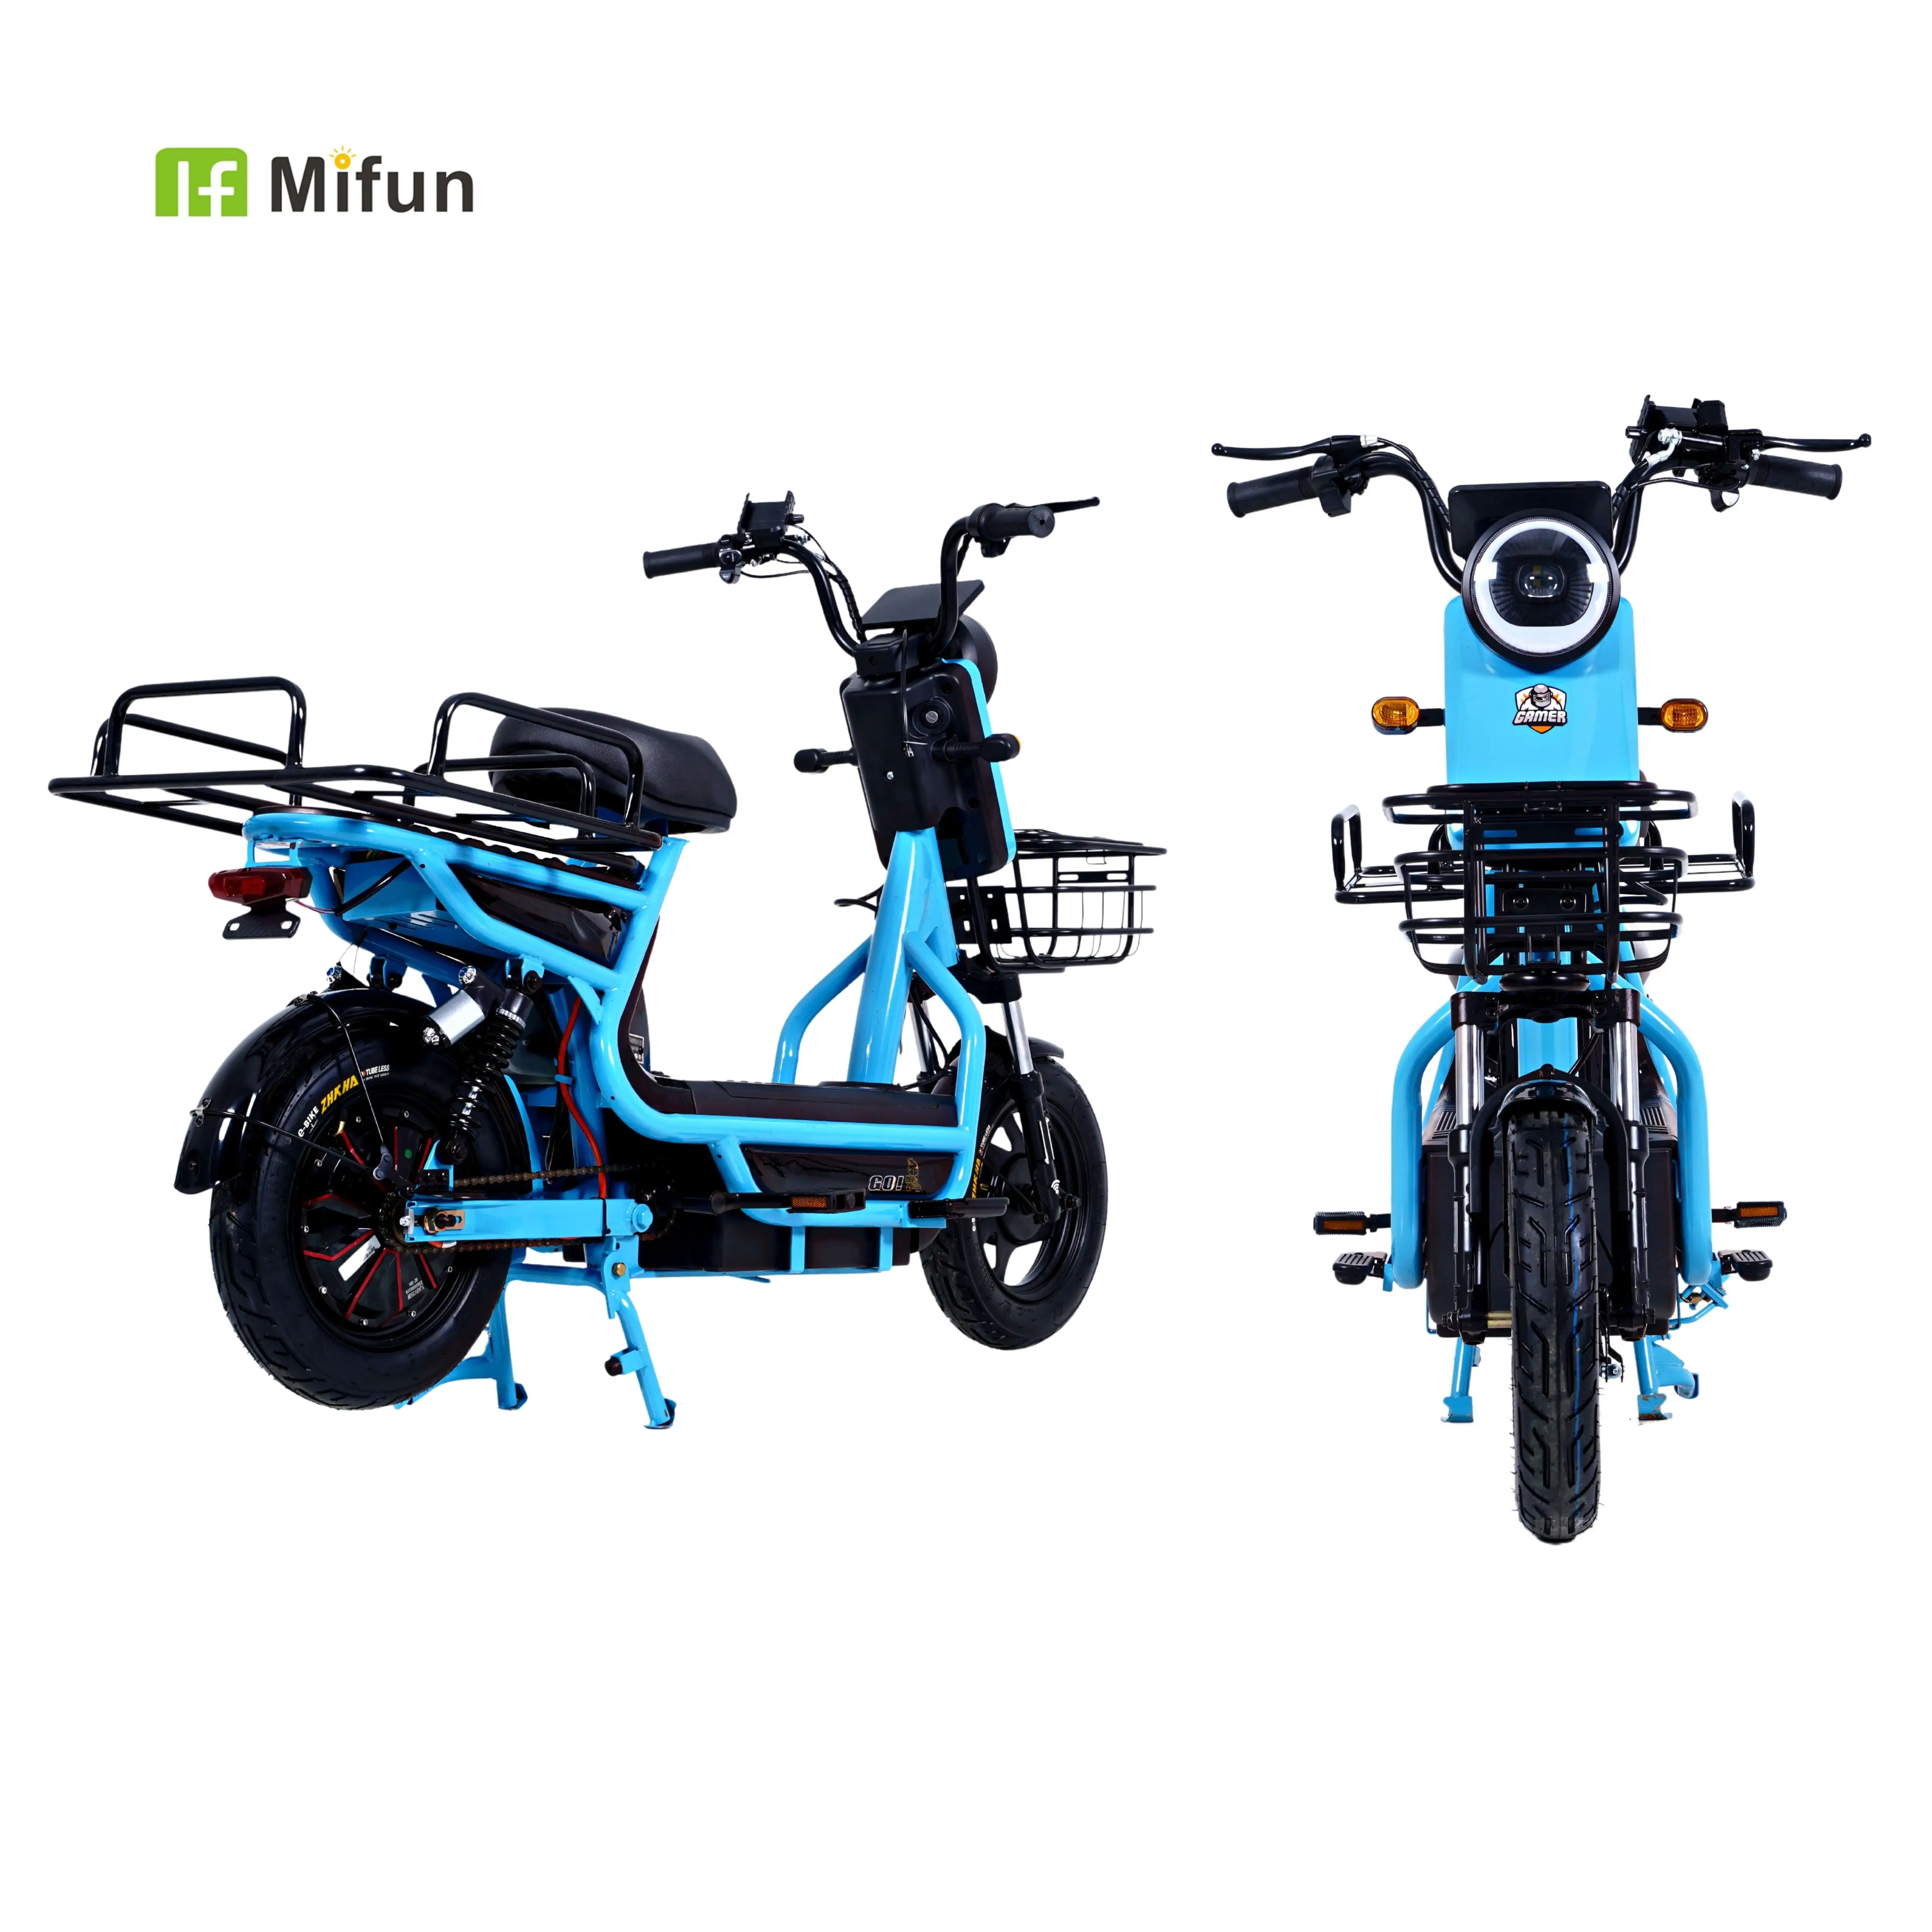 Mifun Best Sale Fashionable Mobility Cheaper Price High Quality 2 Wheel Electric Scooters Electric Bike Motorcycles